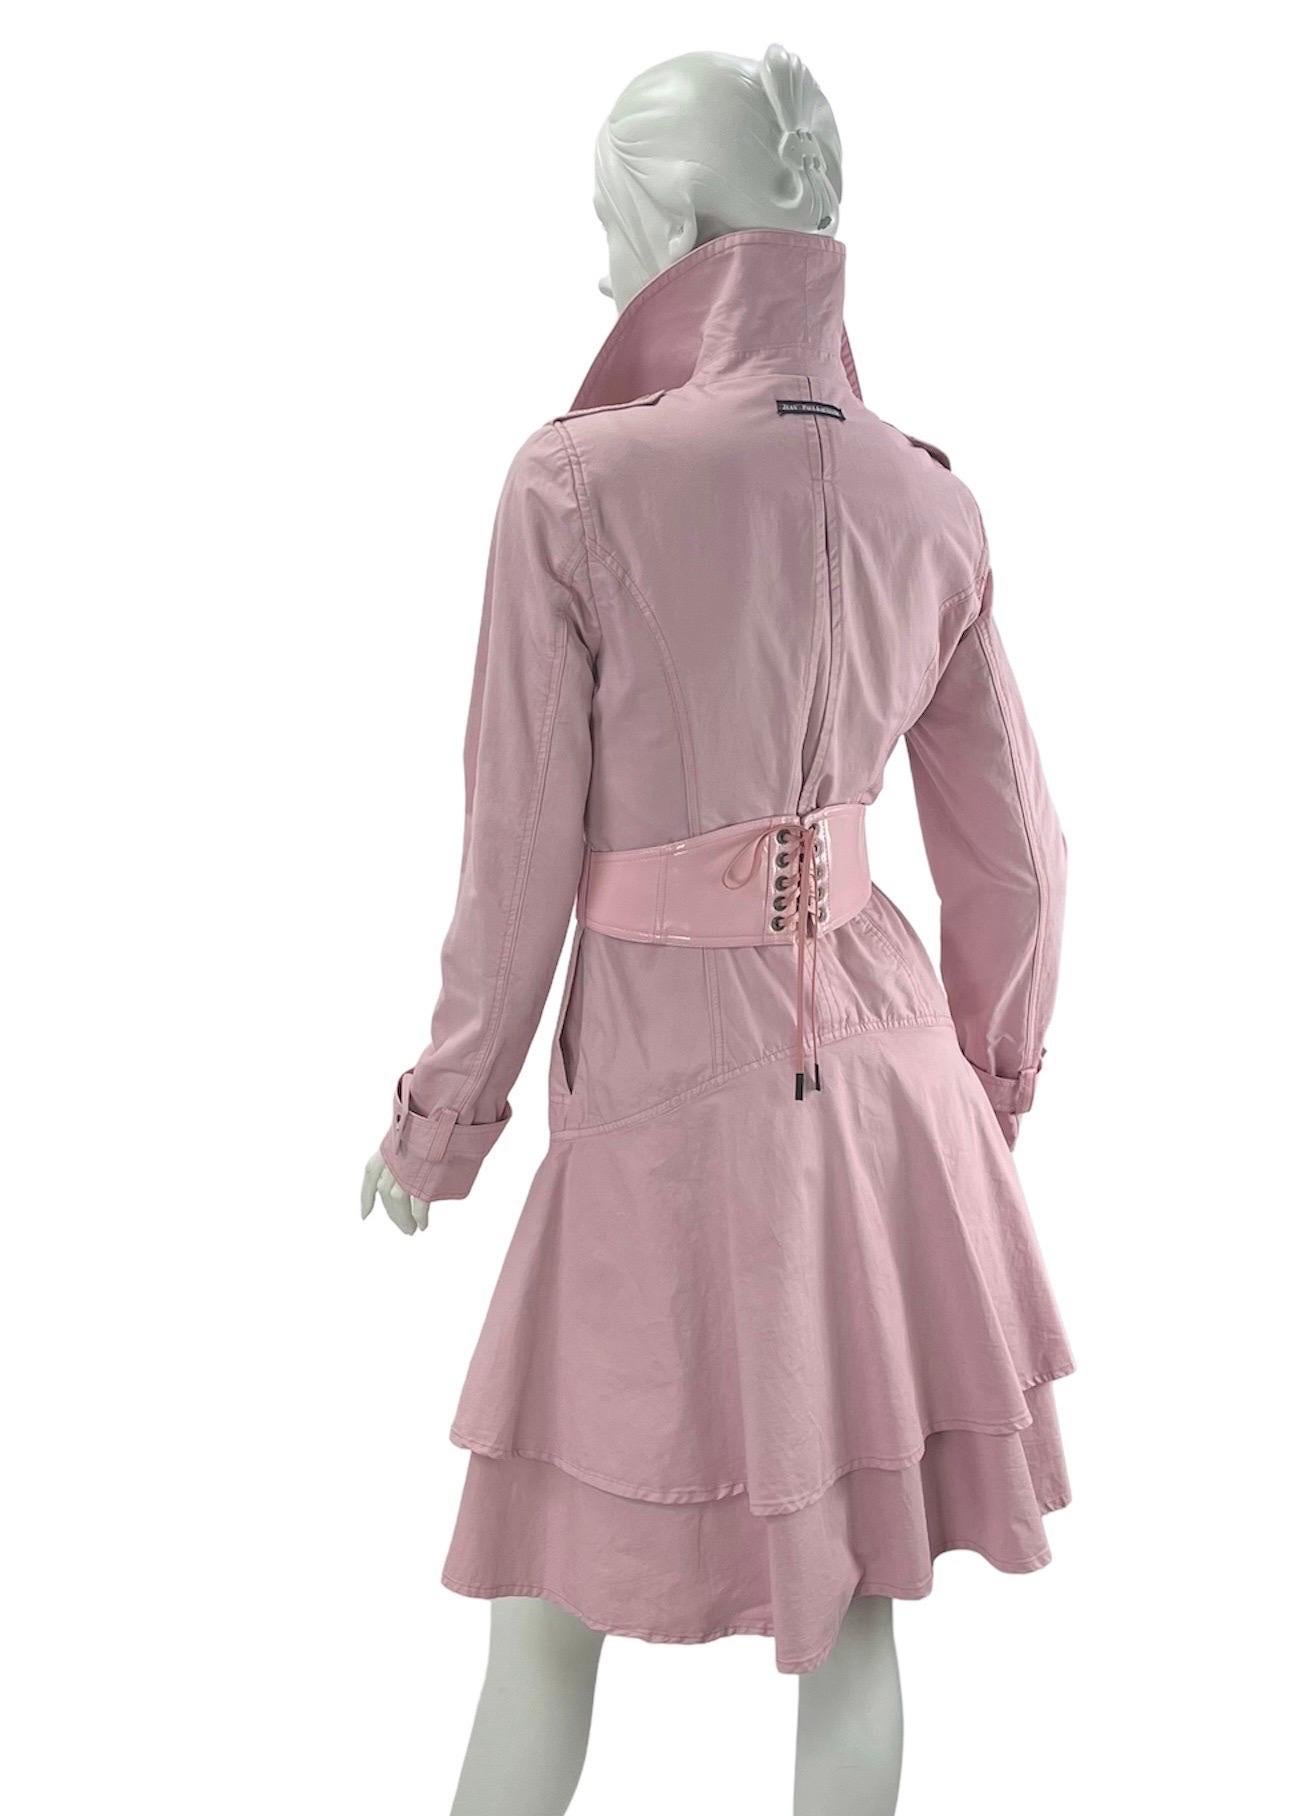 Vintage Jean Paul Gaultier Tiered Ruffle Trench Coat with Patent Leather Corset Belt
Italian Size - 40 
Powder Pink, Double breasted, Signature buttons, Signature Grommets, Two side pockets, Removable corset belt, Adjustable buckle cuffs, Semi